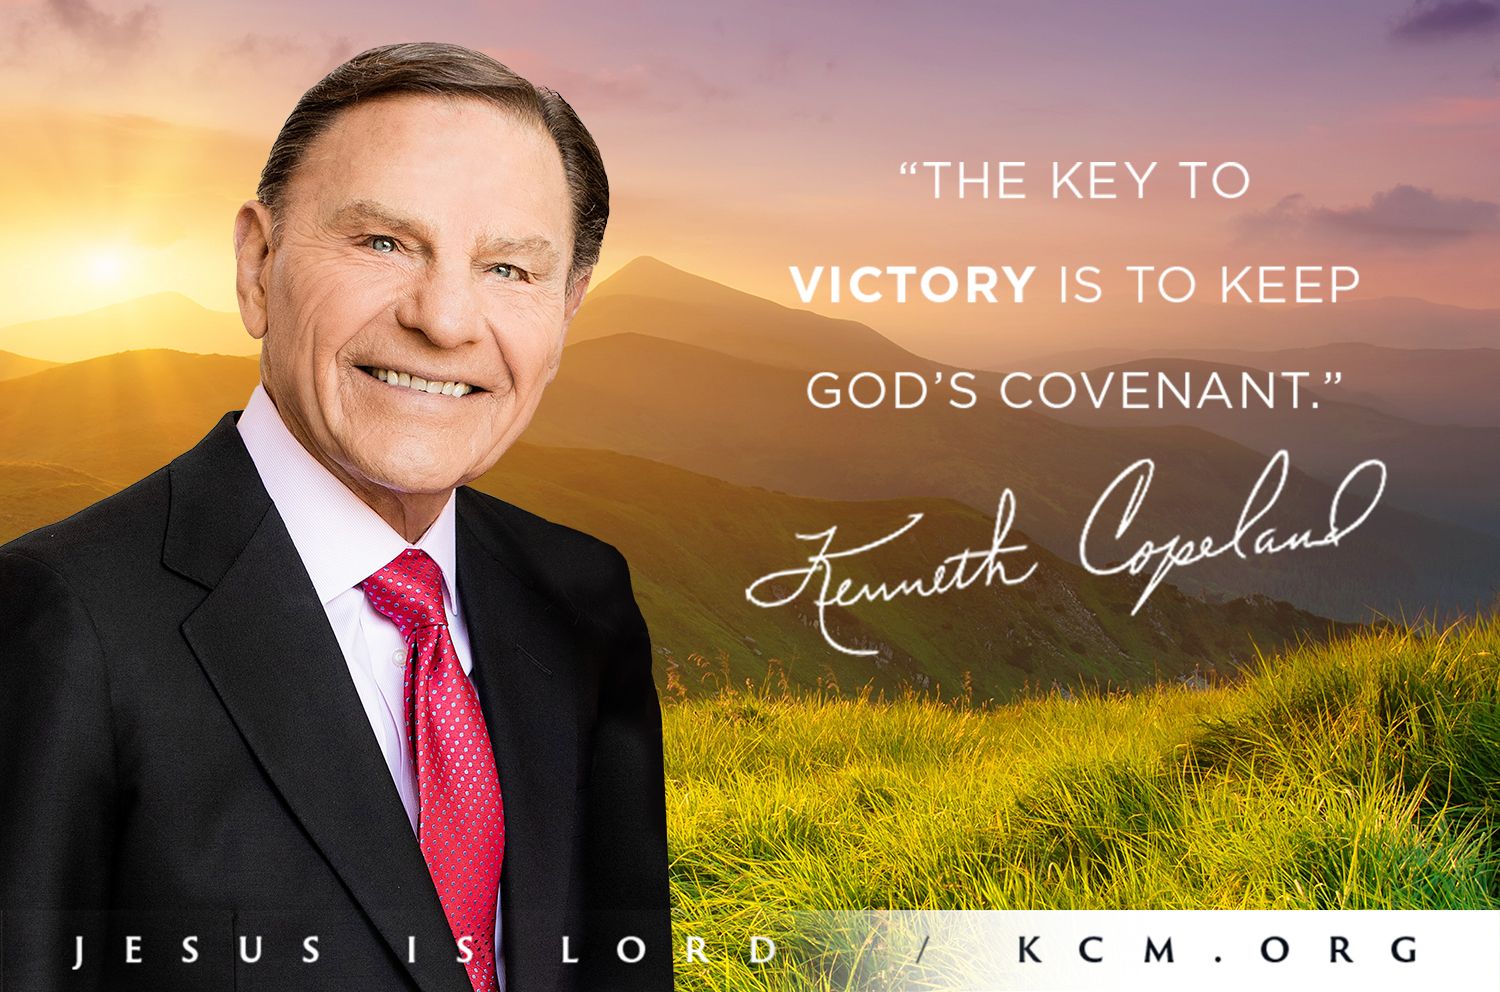 The key to victory is to keep God's Covenant. Watch or Listen to the BVOV Broadcast today